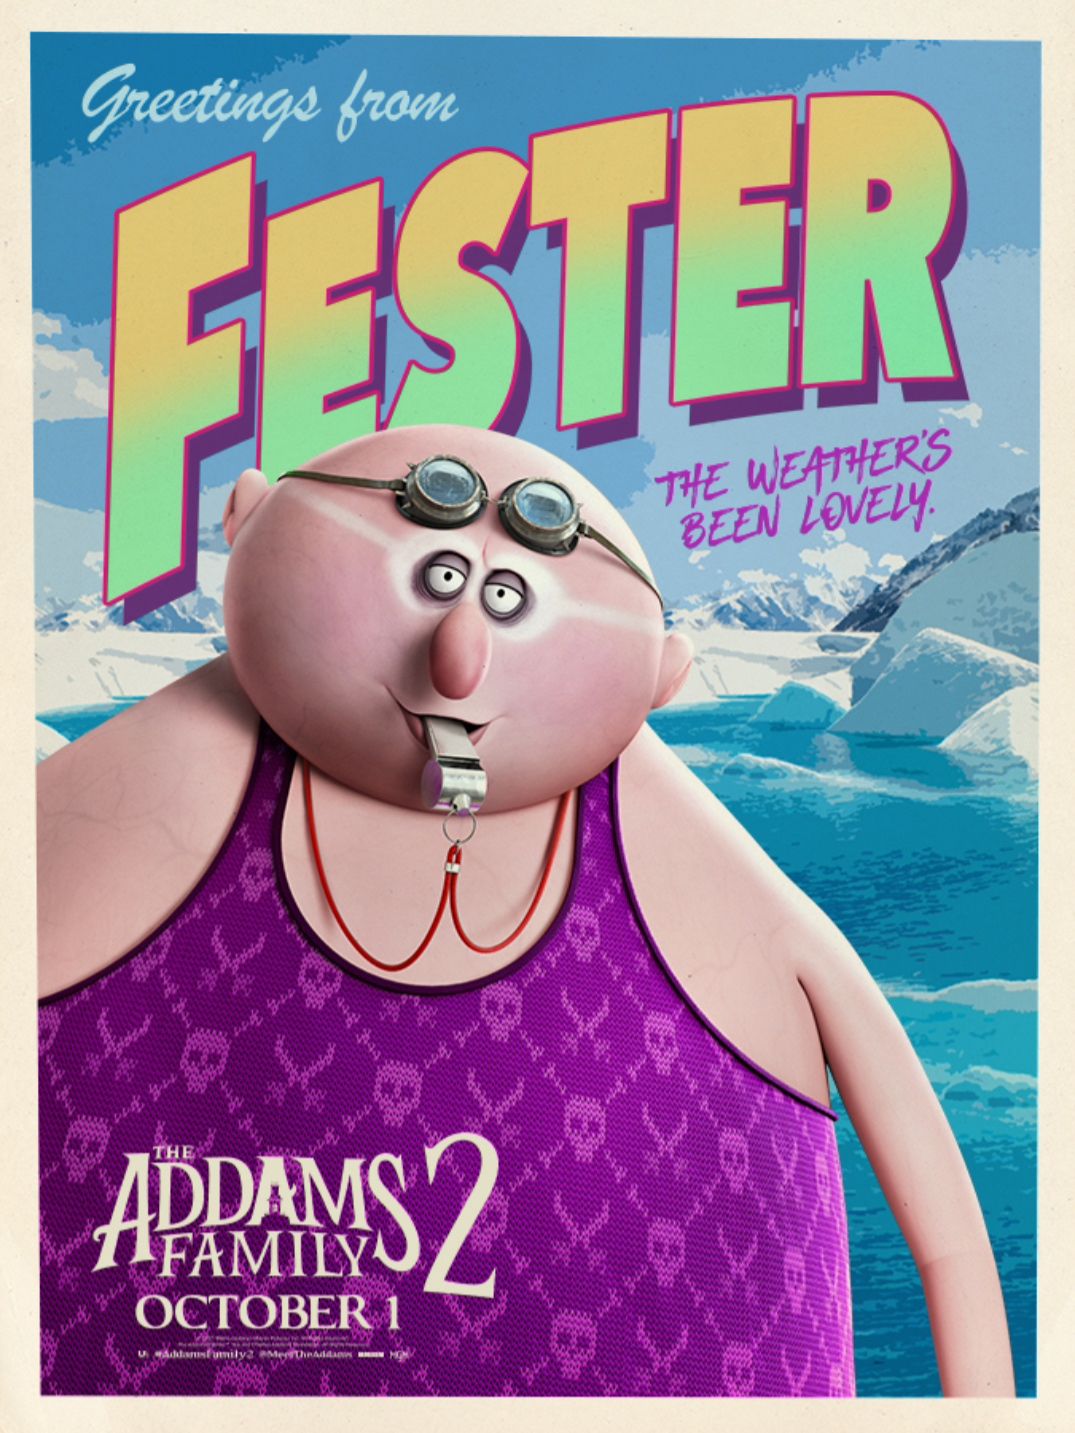 The Addams Family 2 Fester Character Poster